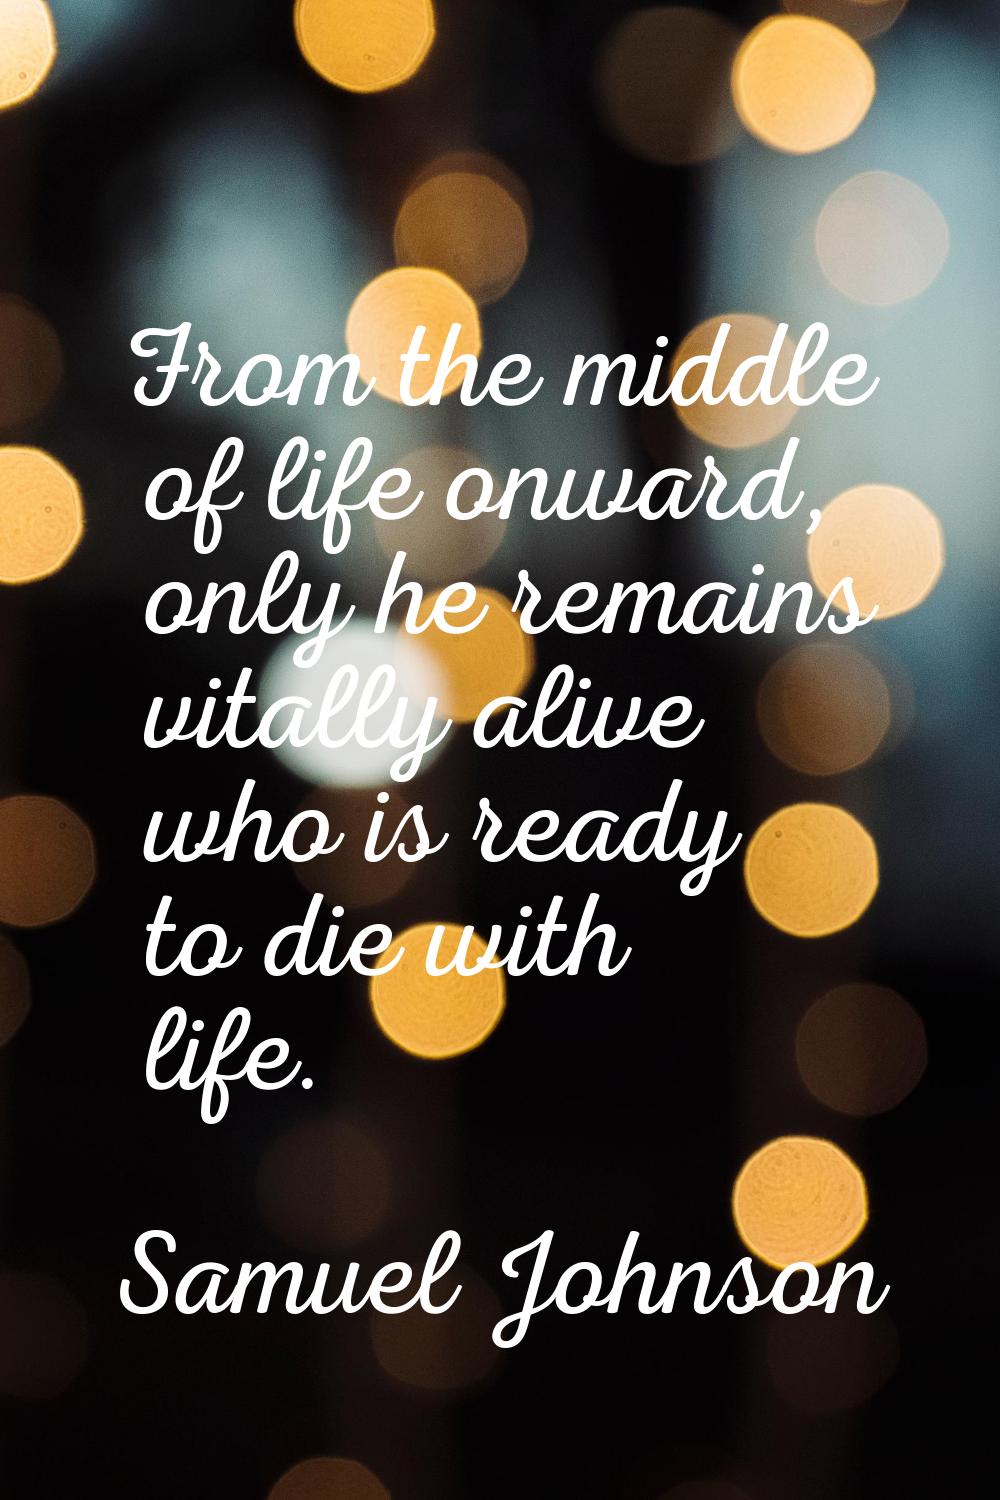 From the middle of life onward, only he remains vitally alive who is ready to die with life.